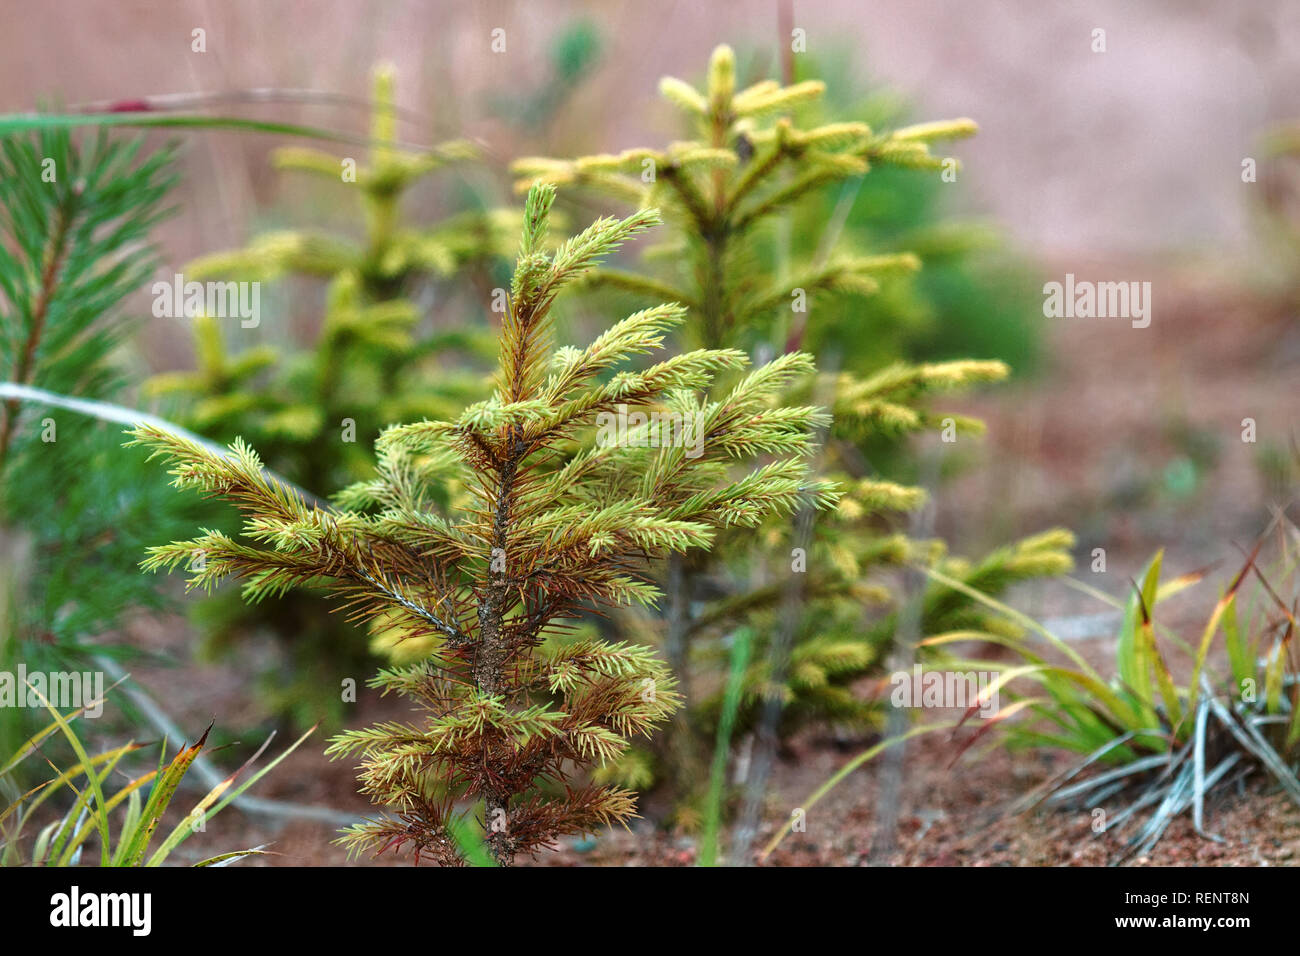 Afforestation. Young firs planted (regrowth) on plot with sandy soil, spruce undergrowth. Small trees in summer Stock Photo